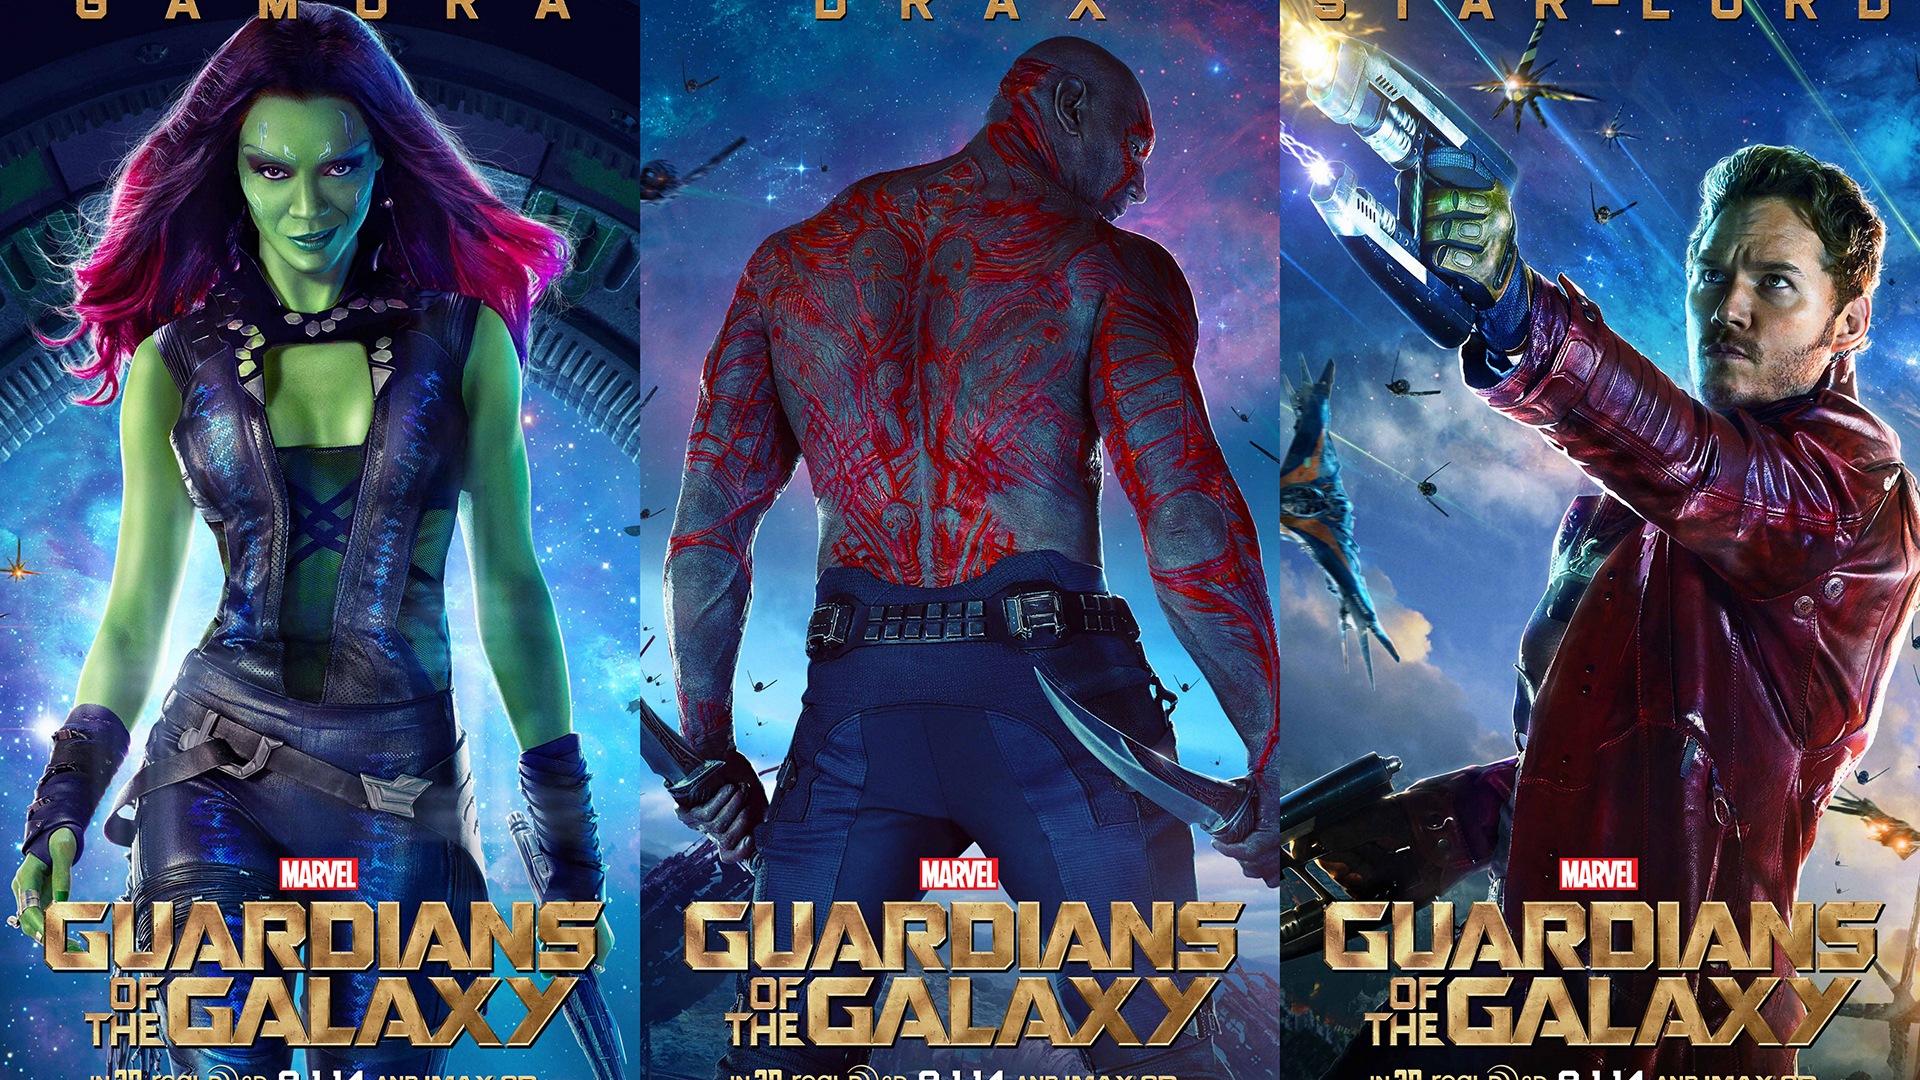 Guardians of the Galaxy 2014 HD movie wallpapers #12 - 1920x1080